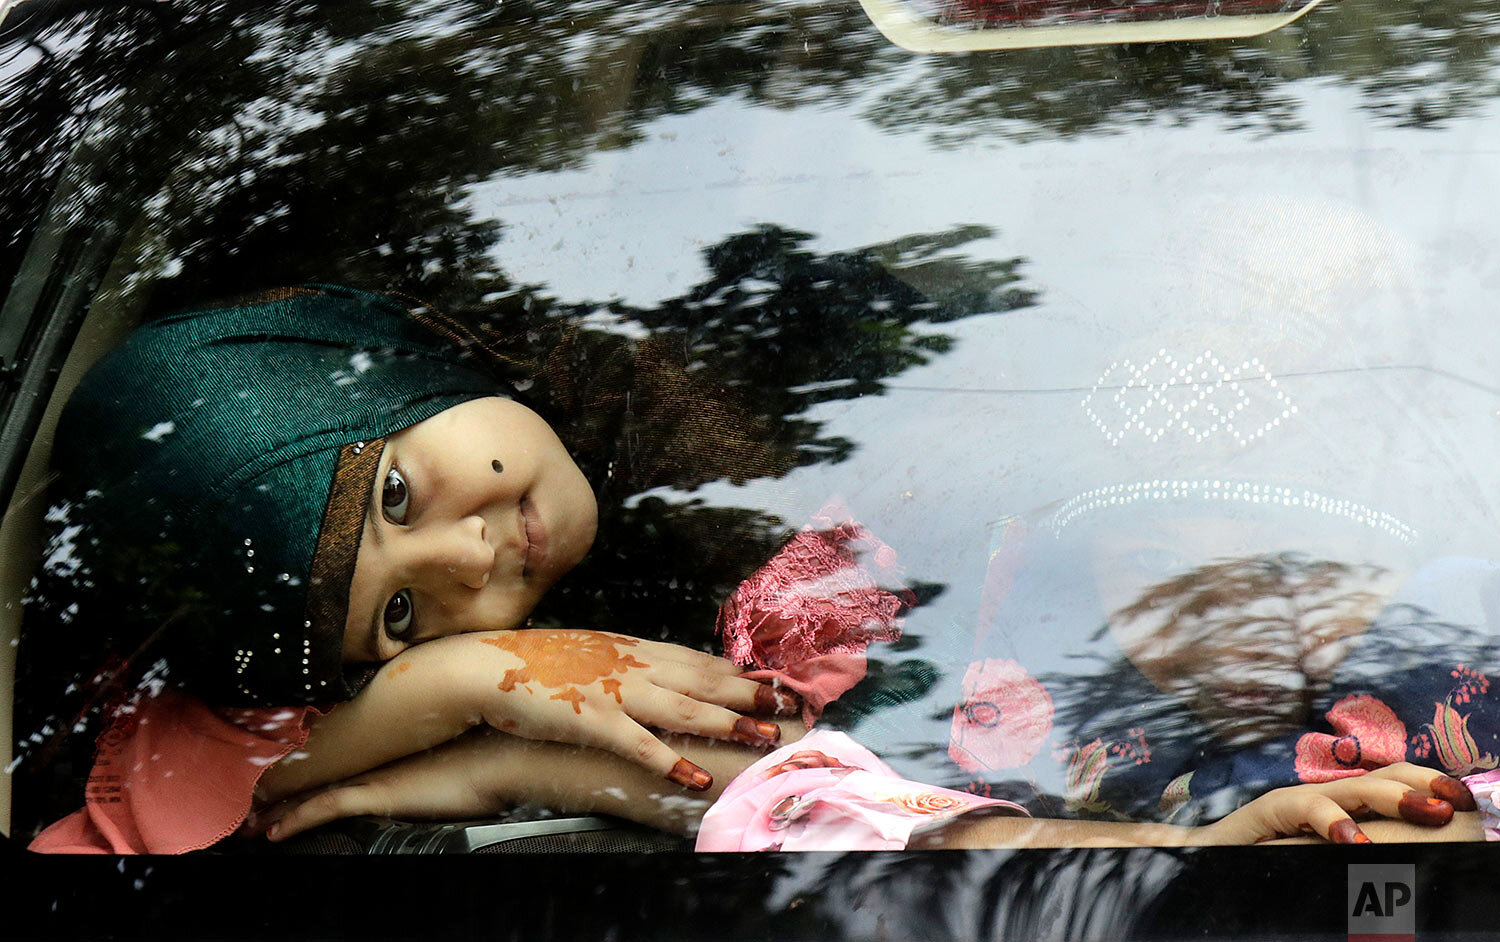  Muslim girls with henna-decorated hands look out from a car on Eid in Mumbai, India, Saturday, Aug. 1, 2020.  (AP Photo/Rajanish Kakade) 